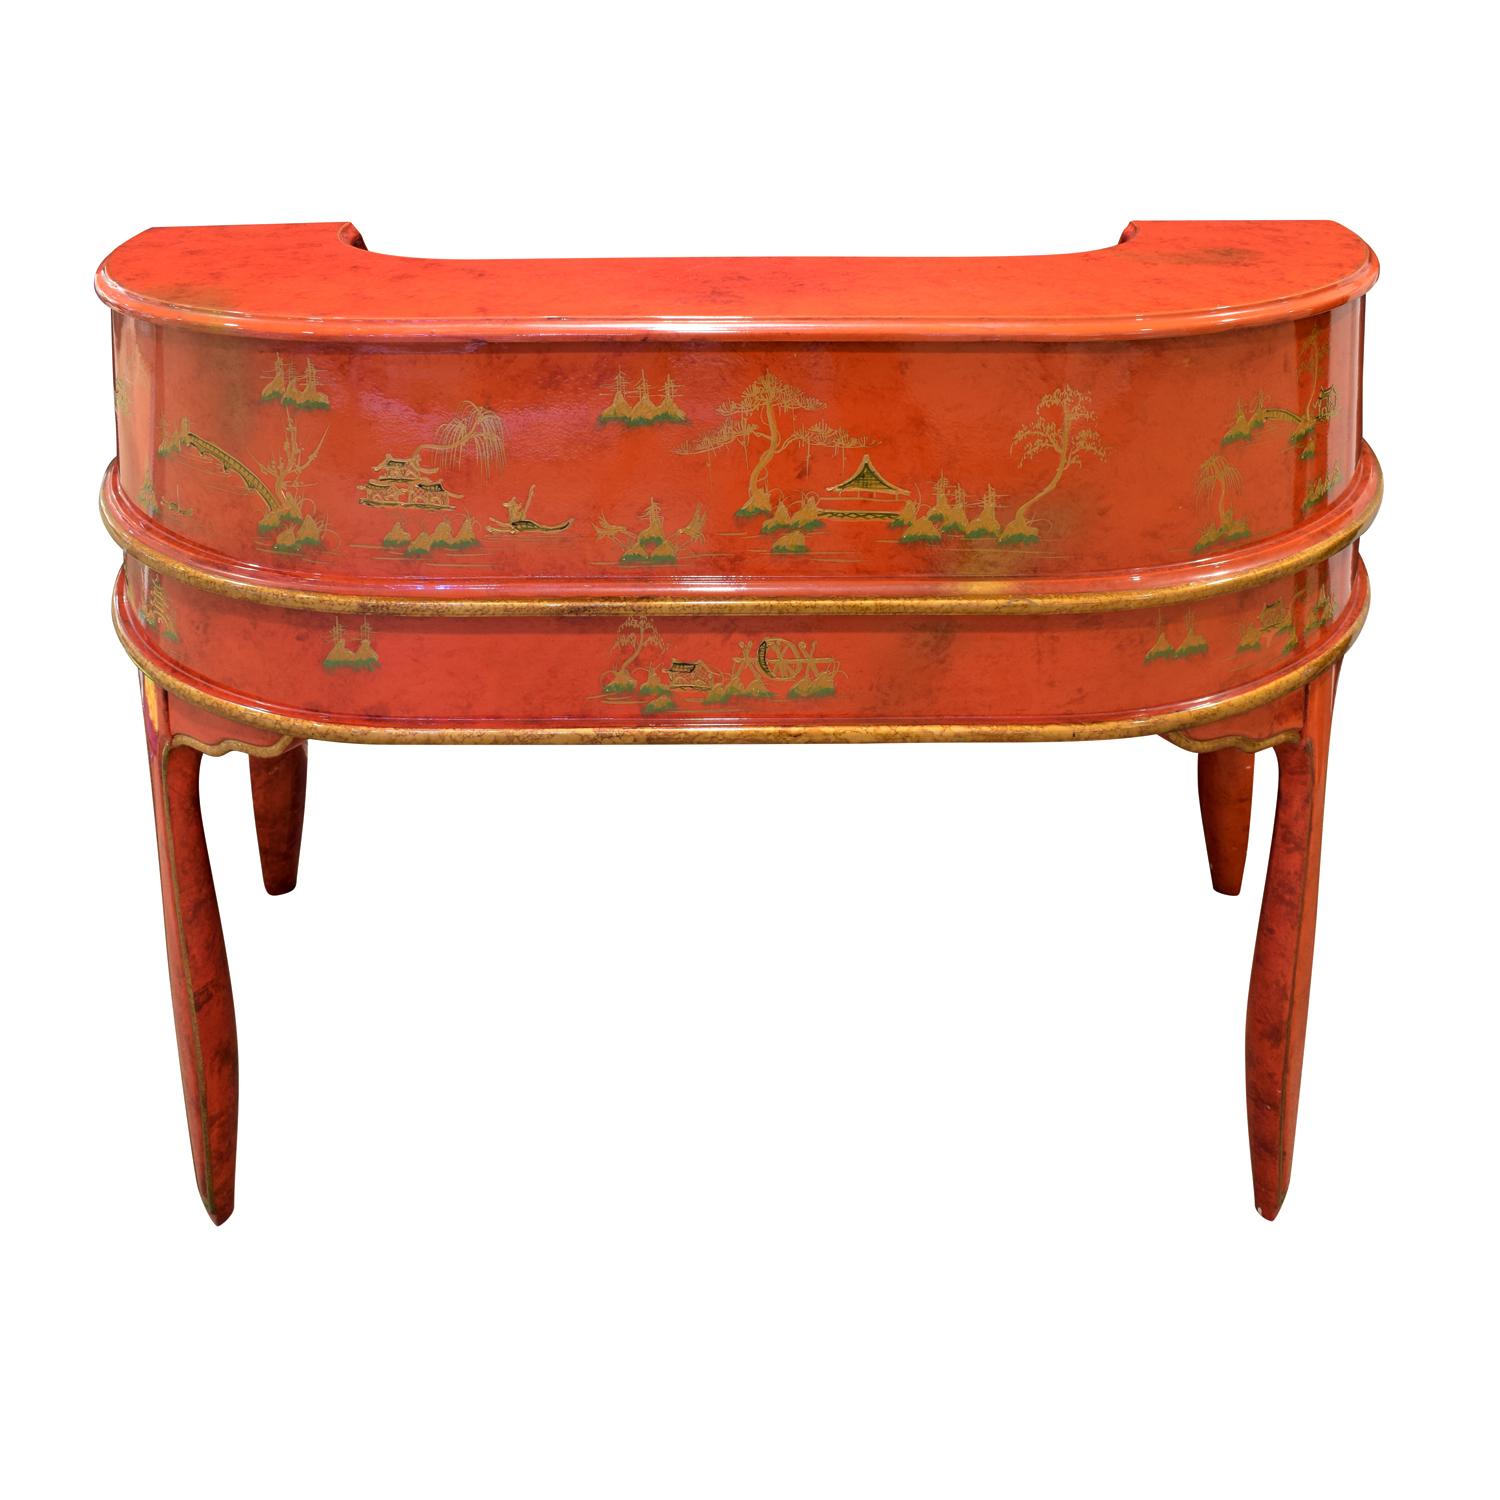 Mid-Century Modern Highly Decorated Chinese Desk in Red Lacquer, 1950s For Sale